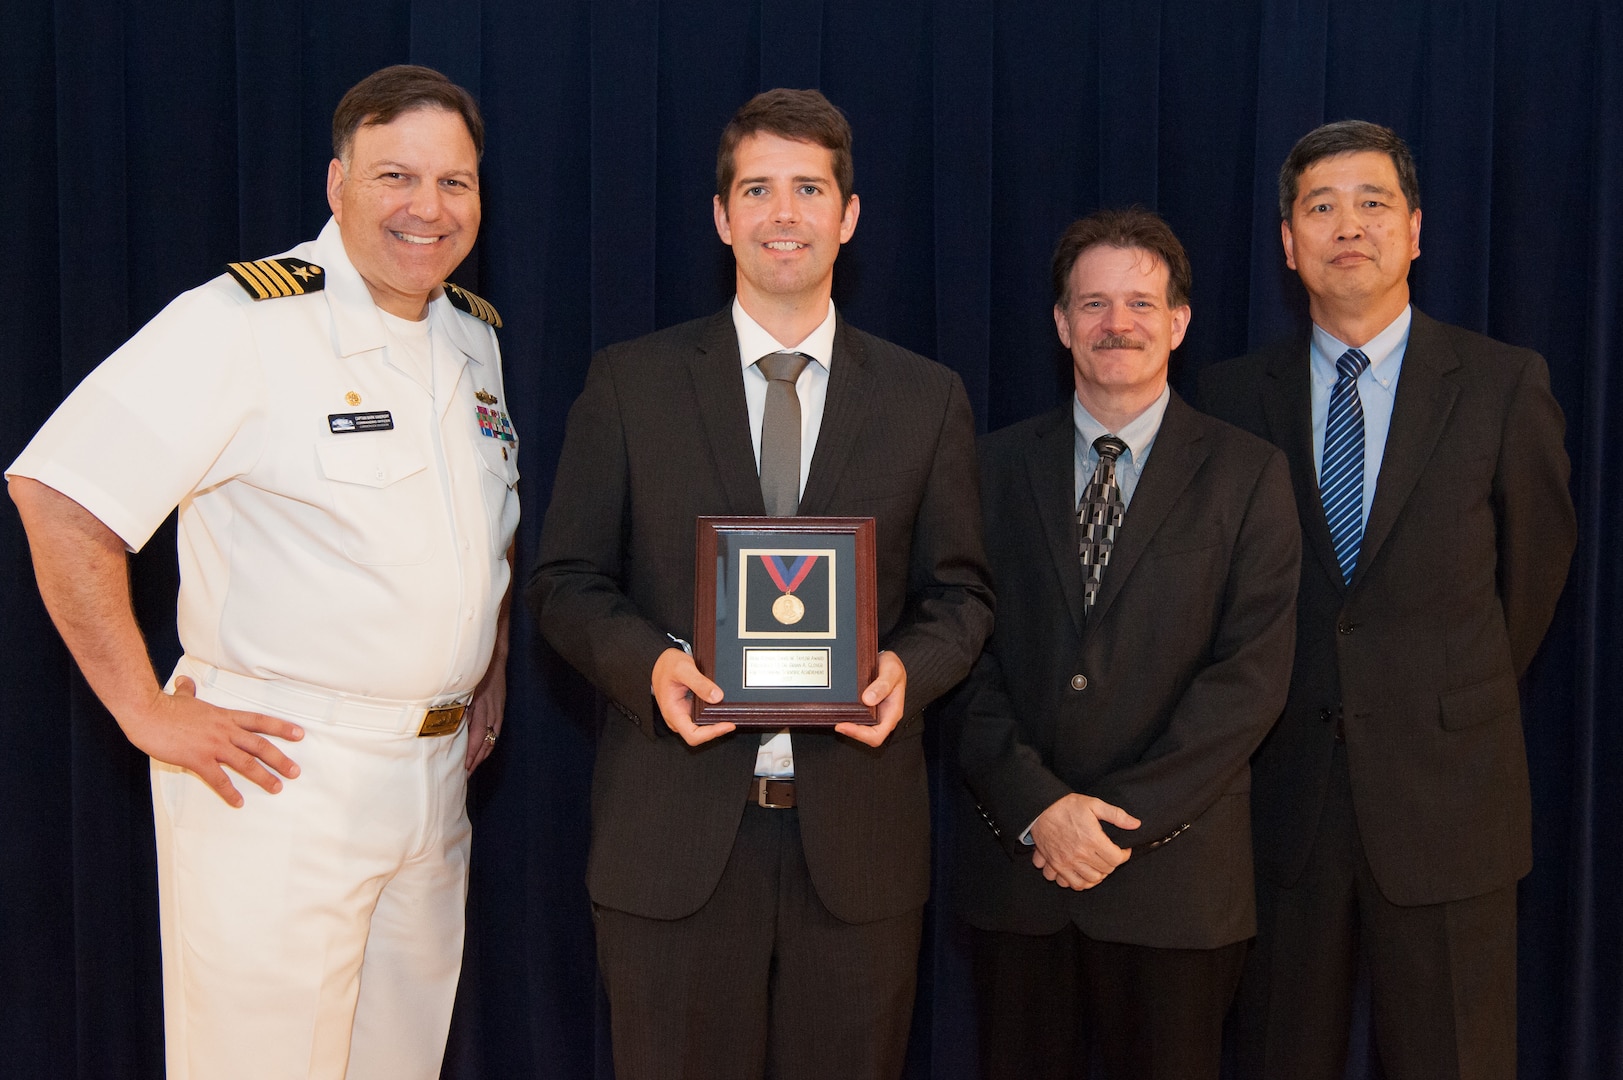 Dr. Brian Glover, a physicist in Carderock's Theory, Modeling and Analysis Branch, receives the Rear Adm. David W. Taylor Award for outstanding scientific achievement at the Naval Surface Warfare Center, Carderock Division Honor Awards ceremony Aug. 28, 2018, in West Bethesda, Md. From left to right: Commanding Officer Capt. Mark Vandroff; Glover; Mike Slater, division head of Carderock's Signatures Measurement Technologies and Systems Division; and Dr. Paul Shang, acting technical director. (U.S. Navy photo by Nicholas Brezzell/Released)